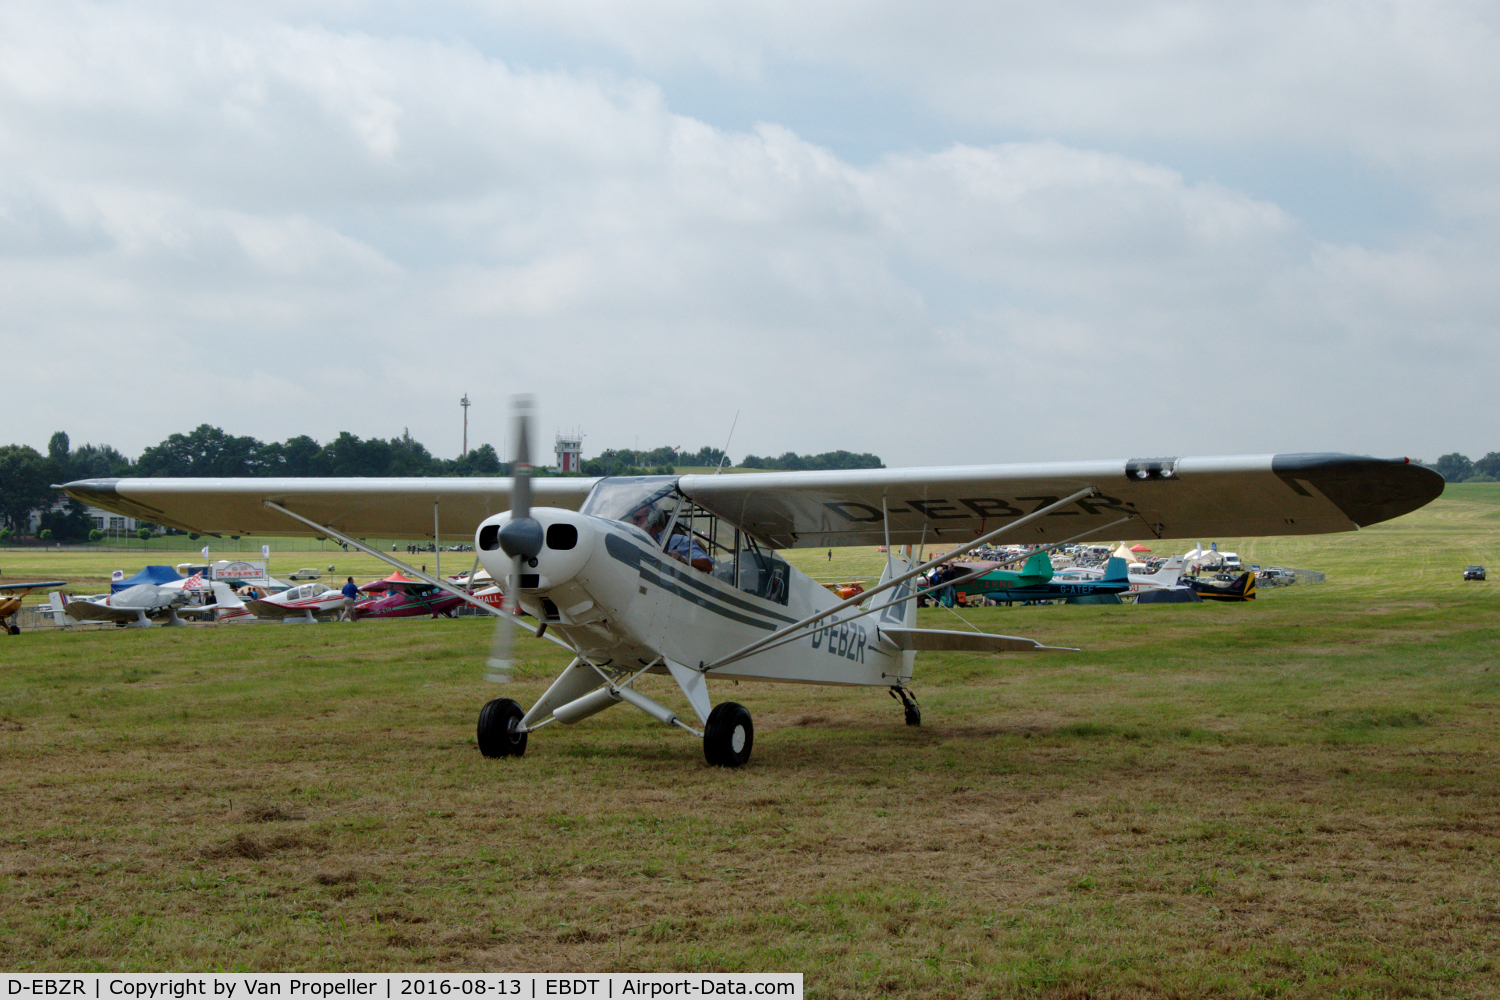 D-EBZR, 1954 Piper L-21B Super Cub (PA-18-135) C/N 18-4017, Piper L-21B Super Cub taxiing in during the 2016 Schaffen-Diest Oldtimer Fly-in